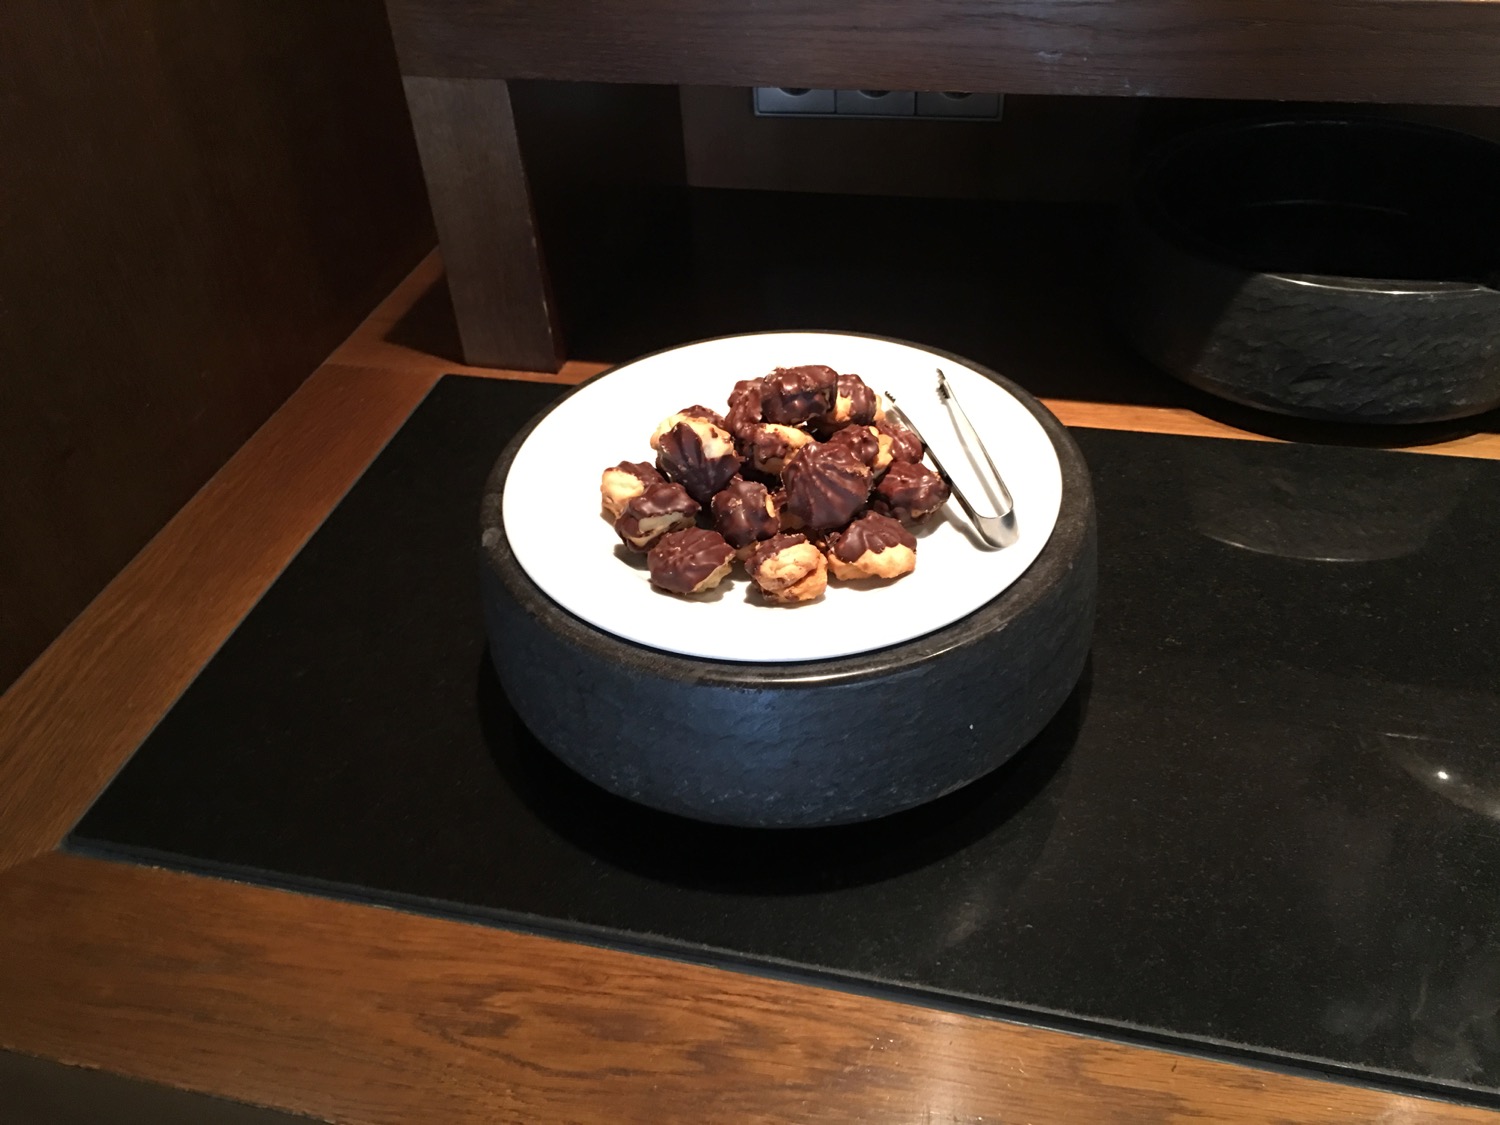 a plate of chocolate covered nuts on a black surface